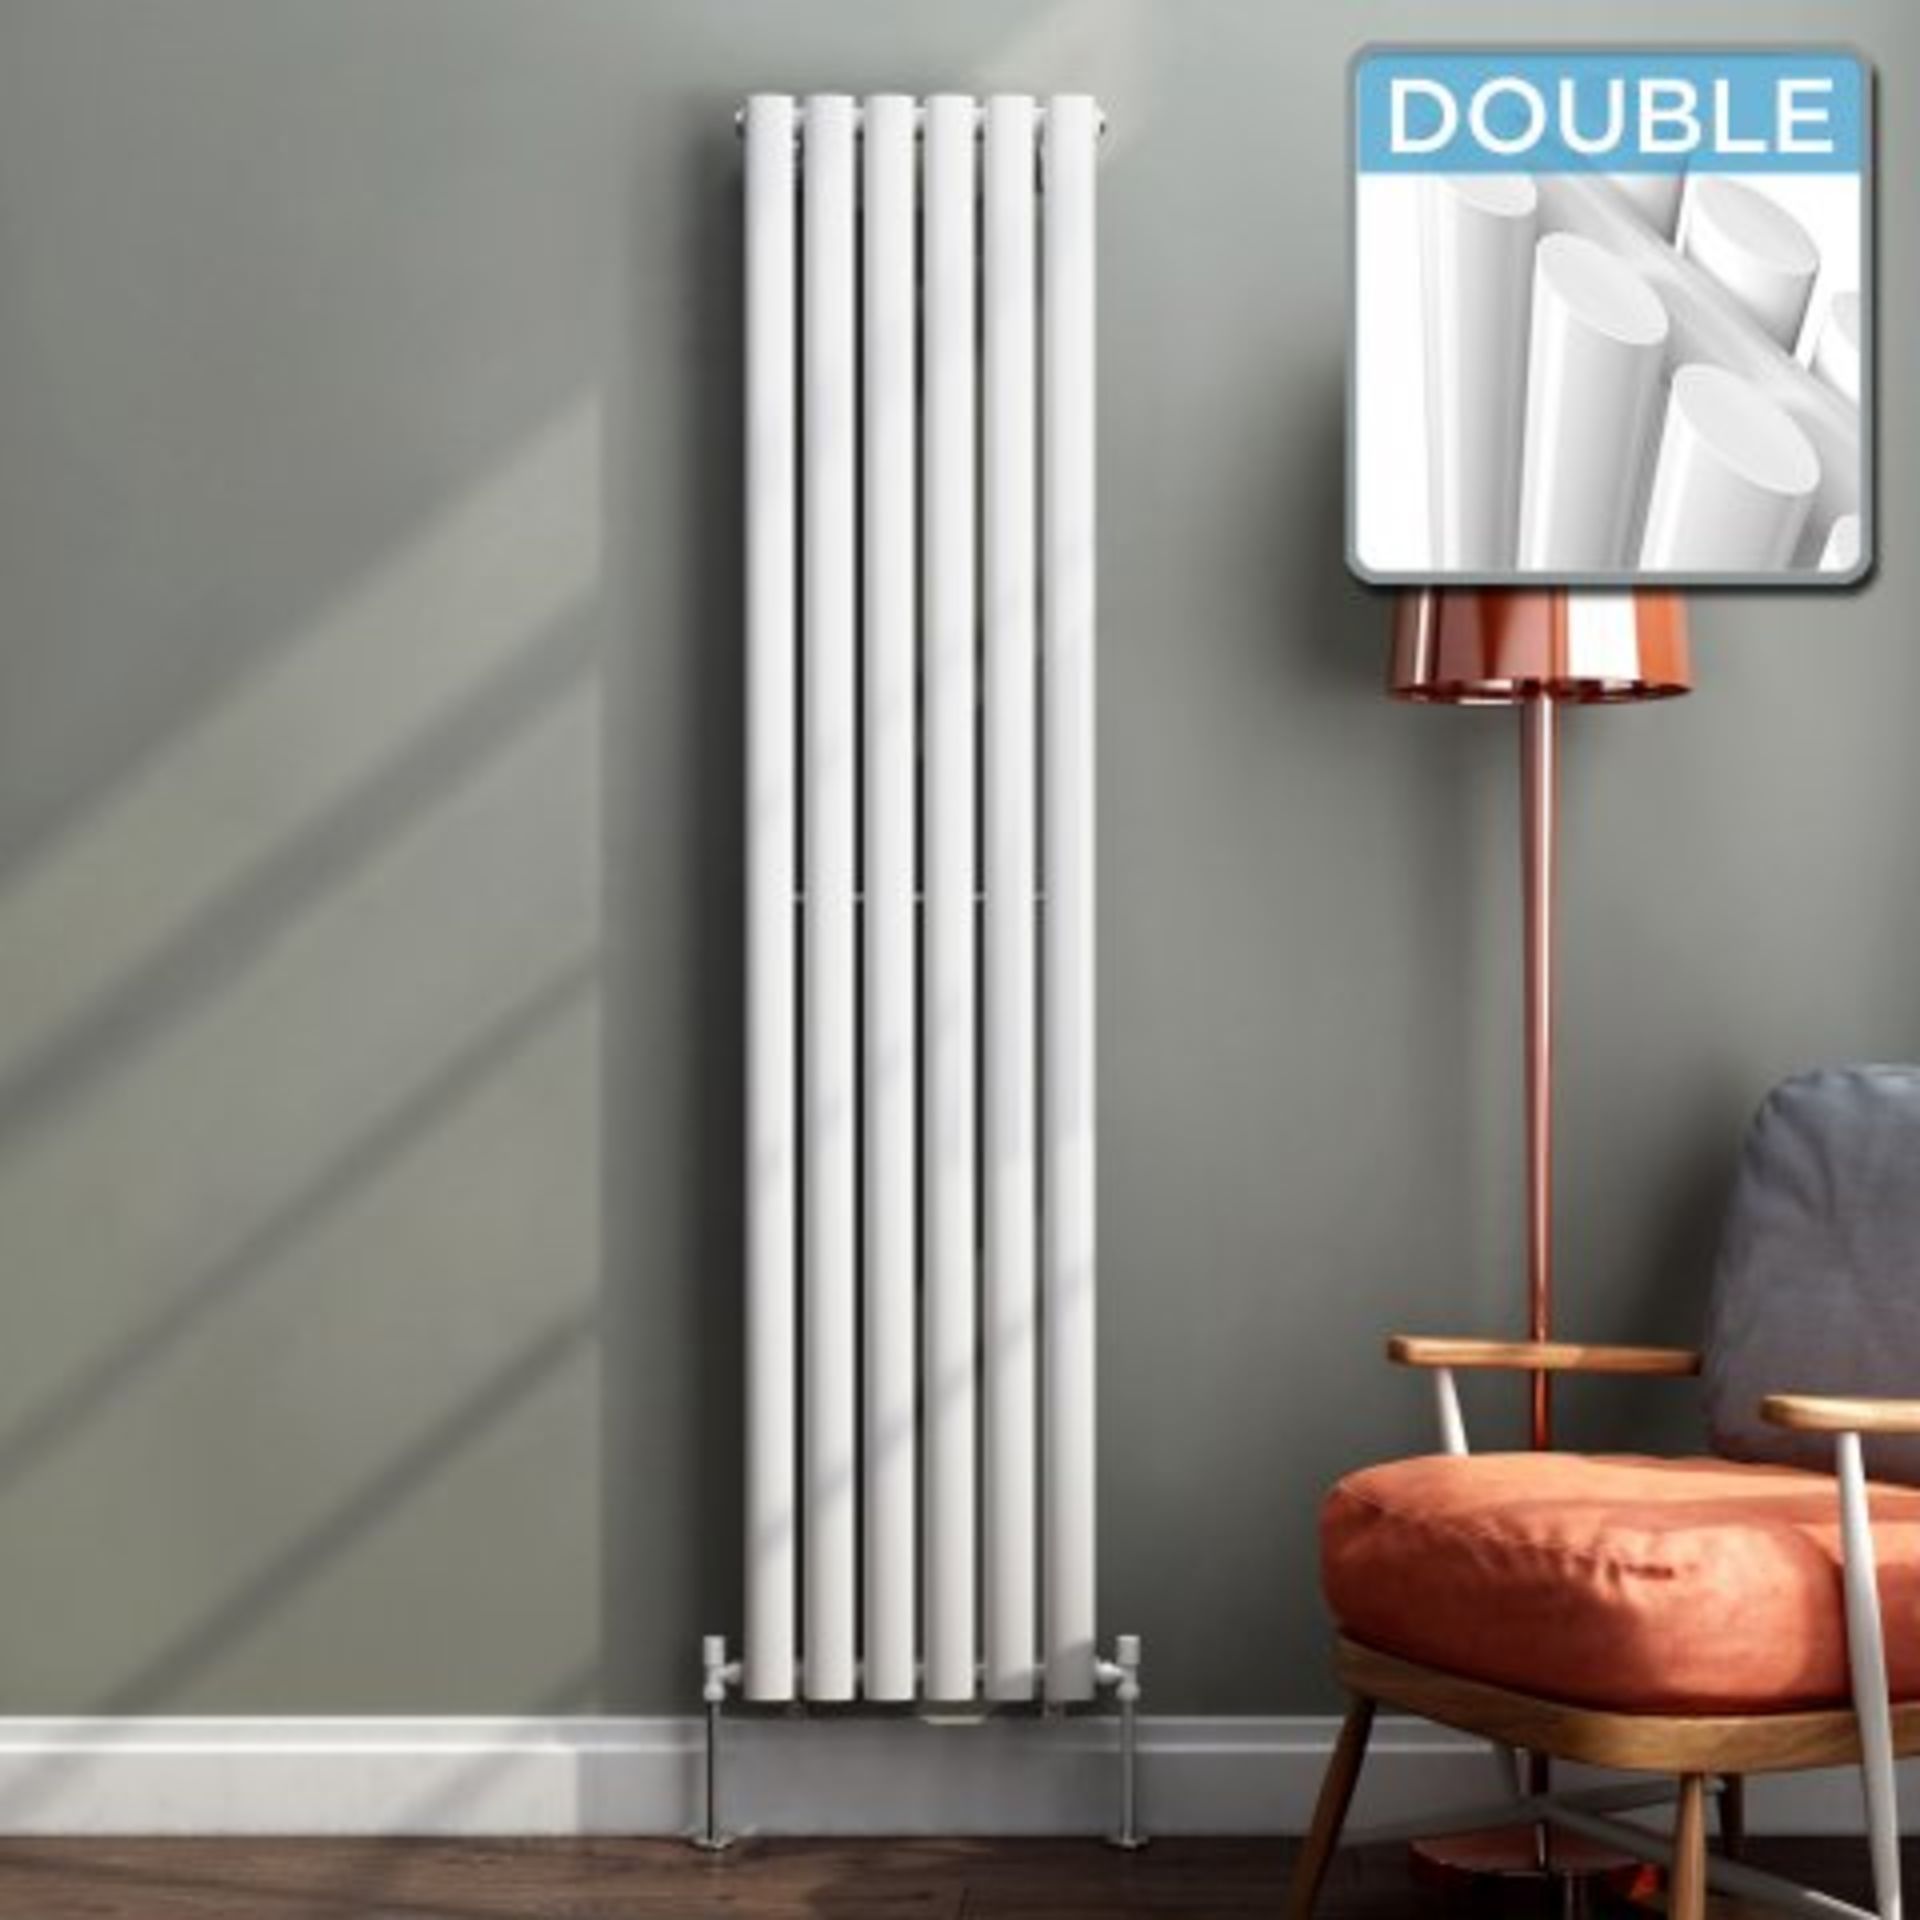 (SKU362) 1600x360mm Gloss White Double Oval Tube Vertical Radiator - Ember Premium. RRP £247.99. Our